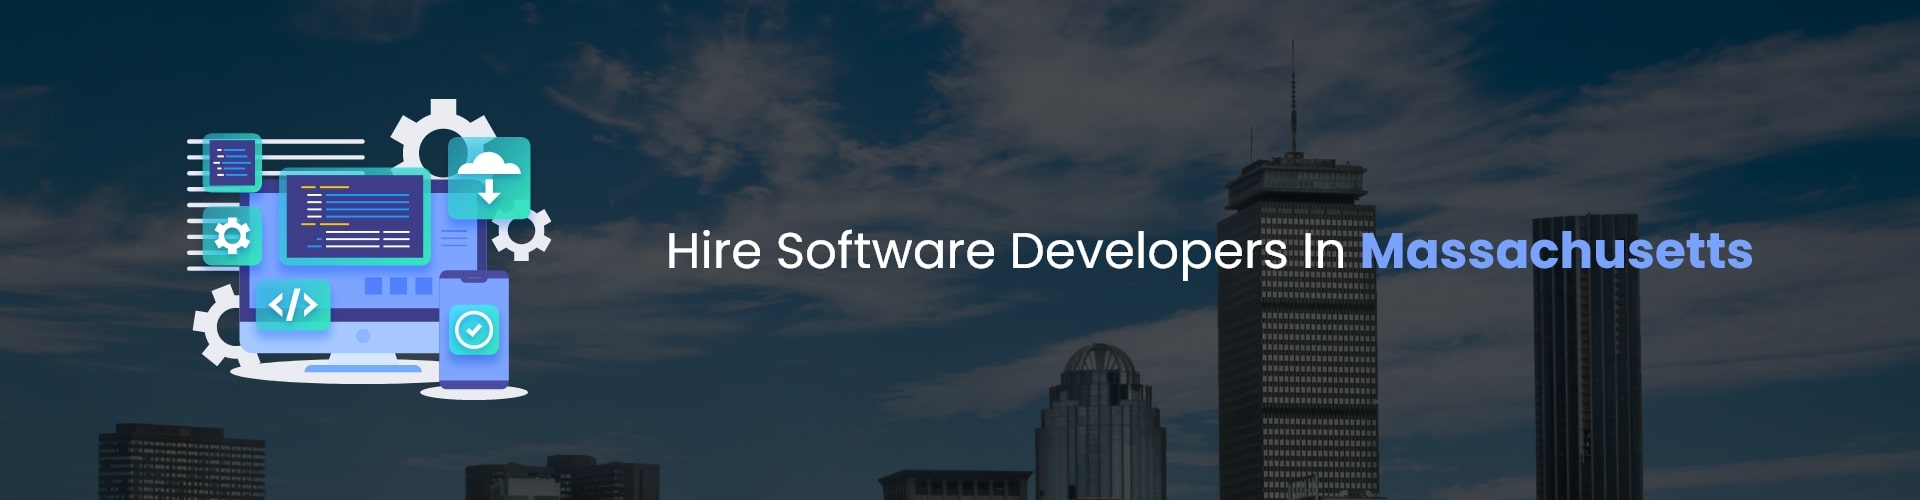 hire software developers in massachusetts